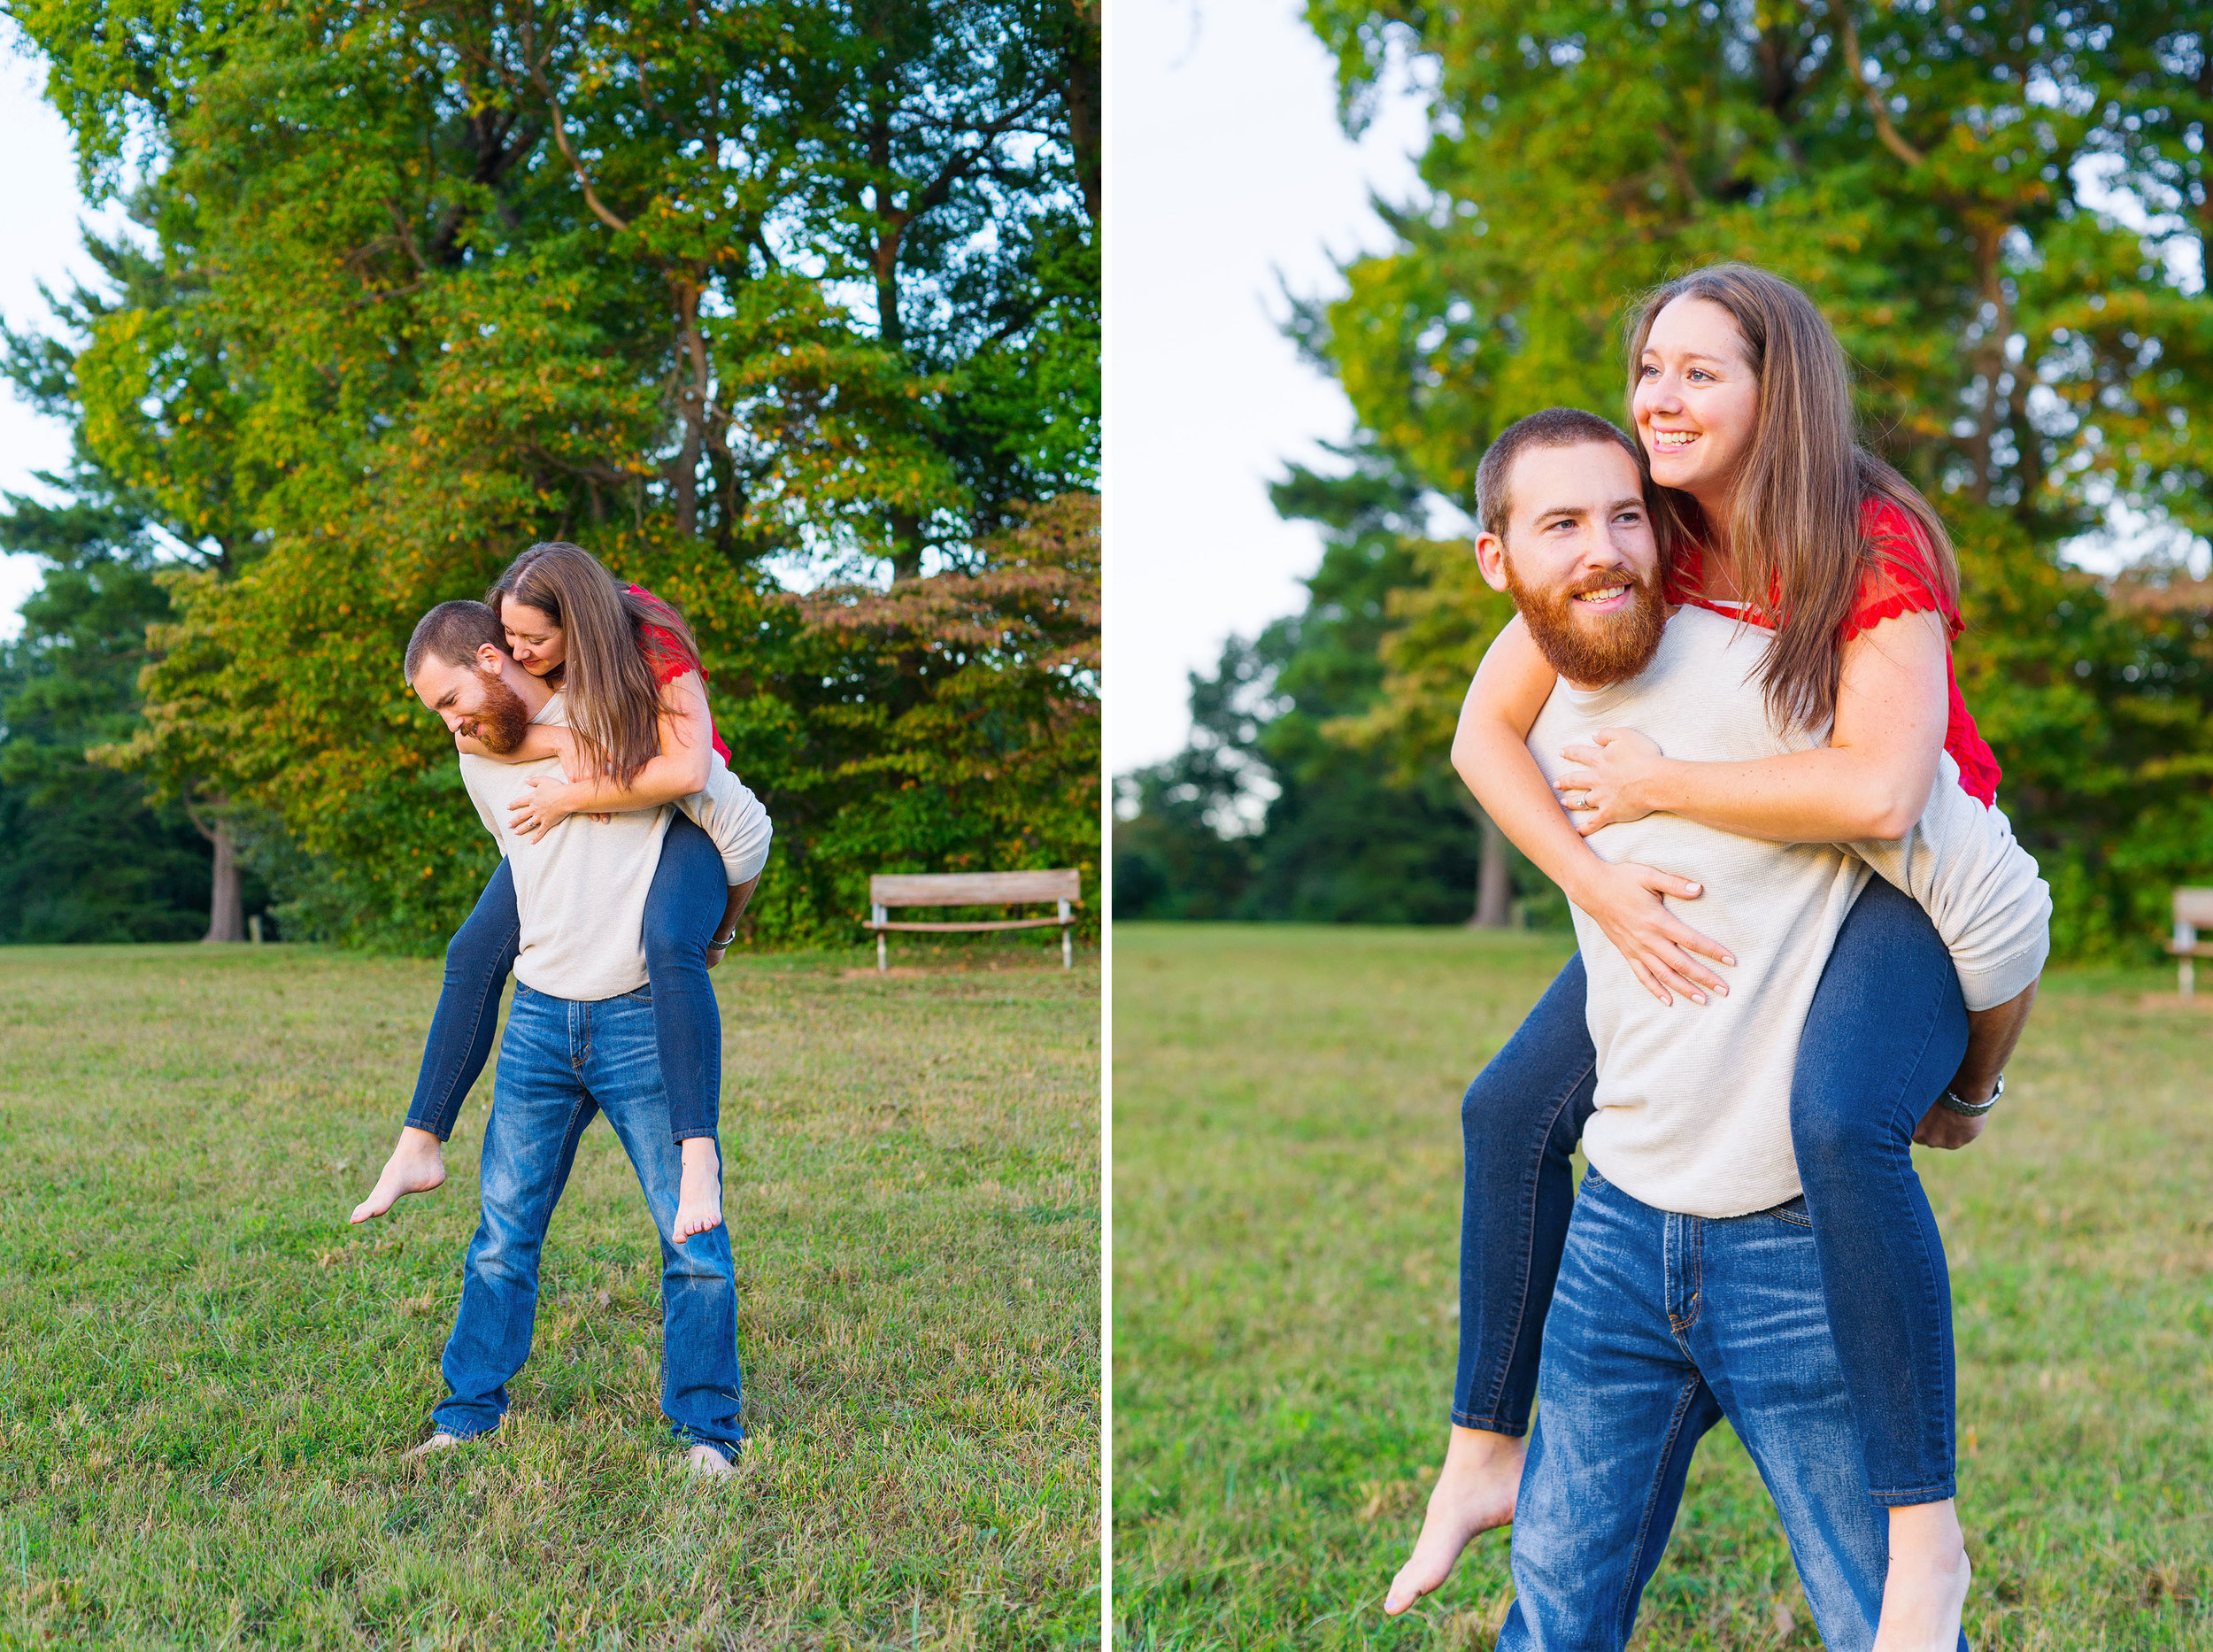 Engagement session ideas in maryland at seneca creek state park by jessica nazarova